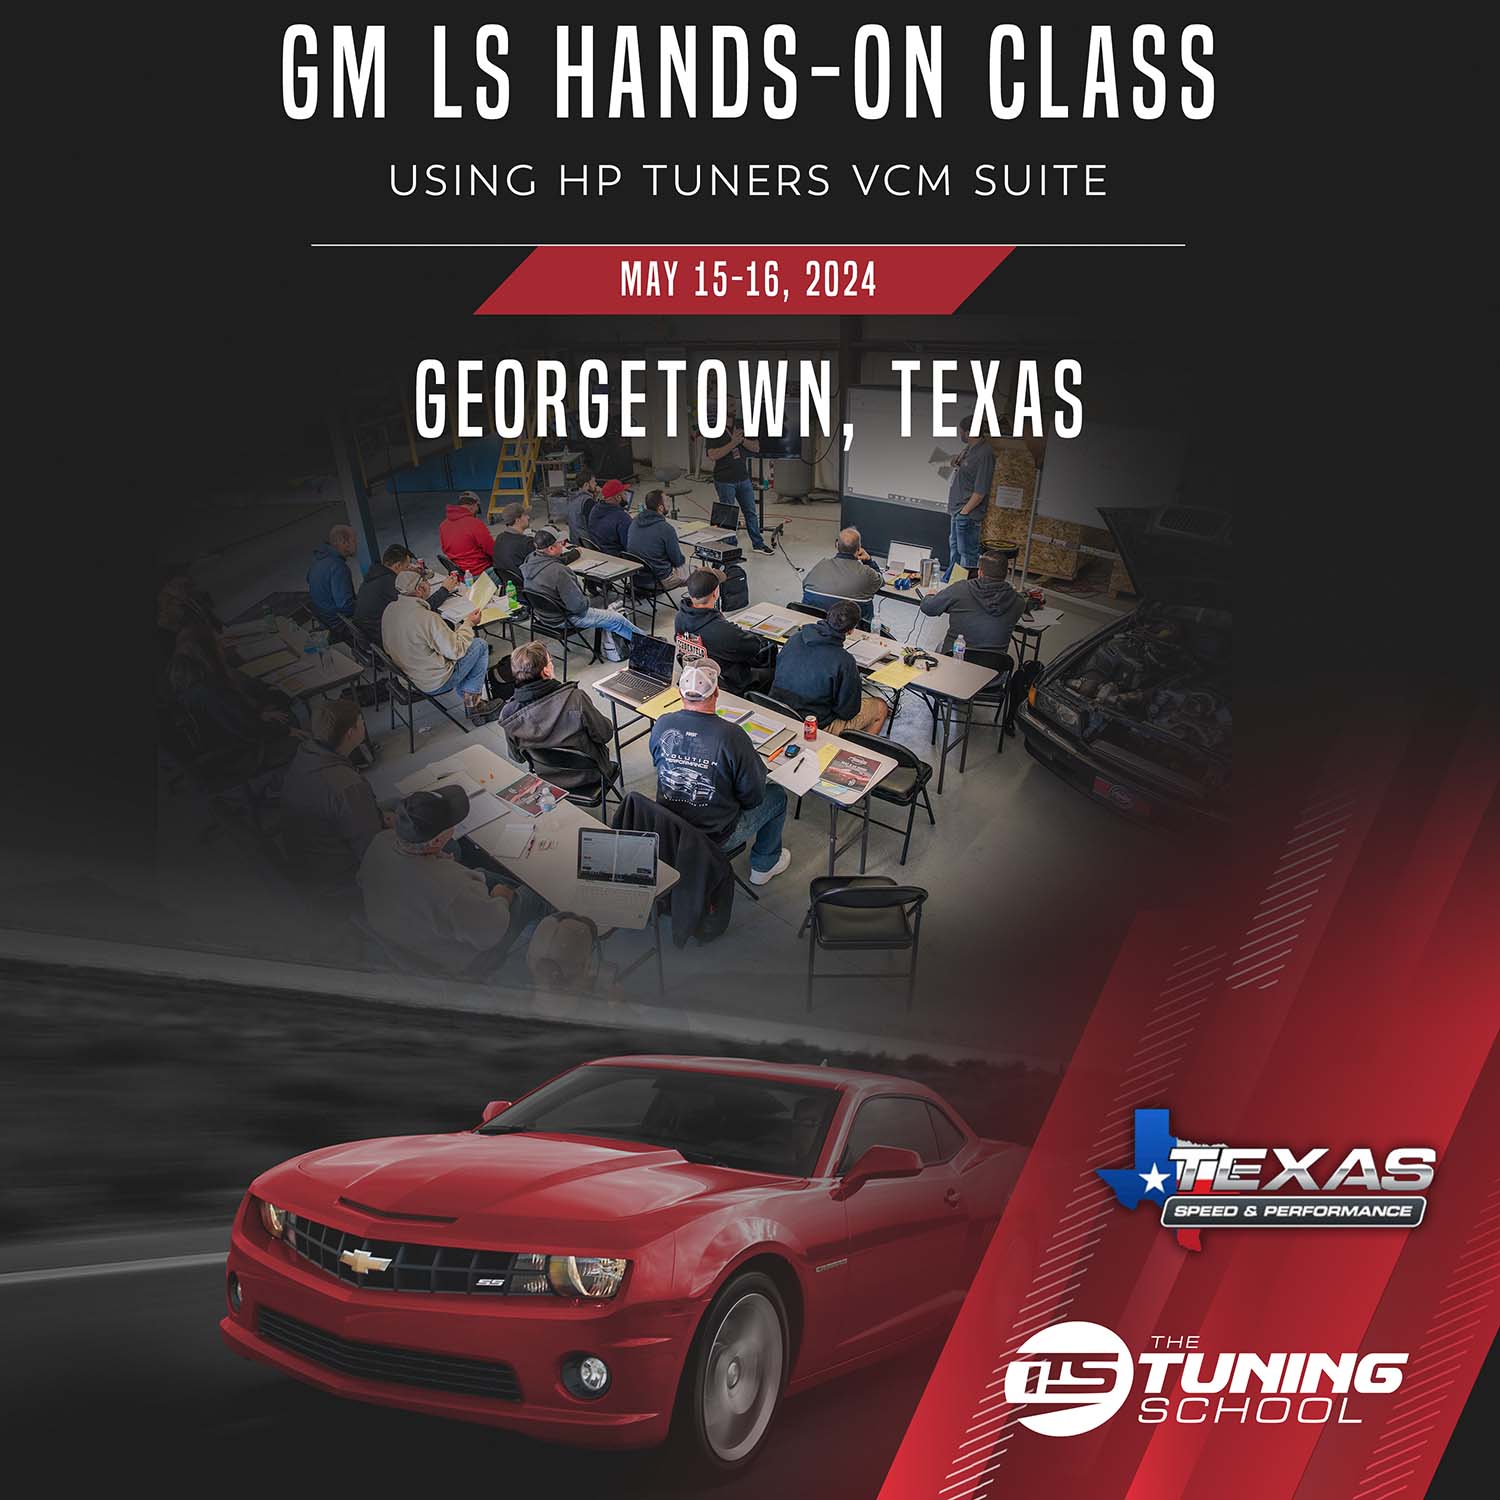 GM LS Engine Hands-On Class using HP Tuners - Georgetown, TX May 2024